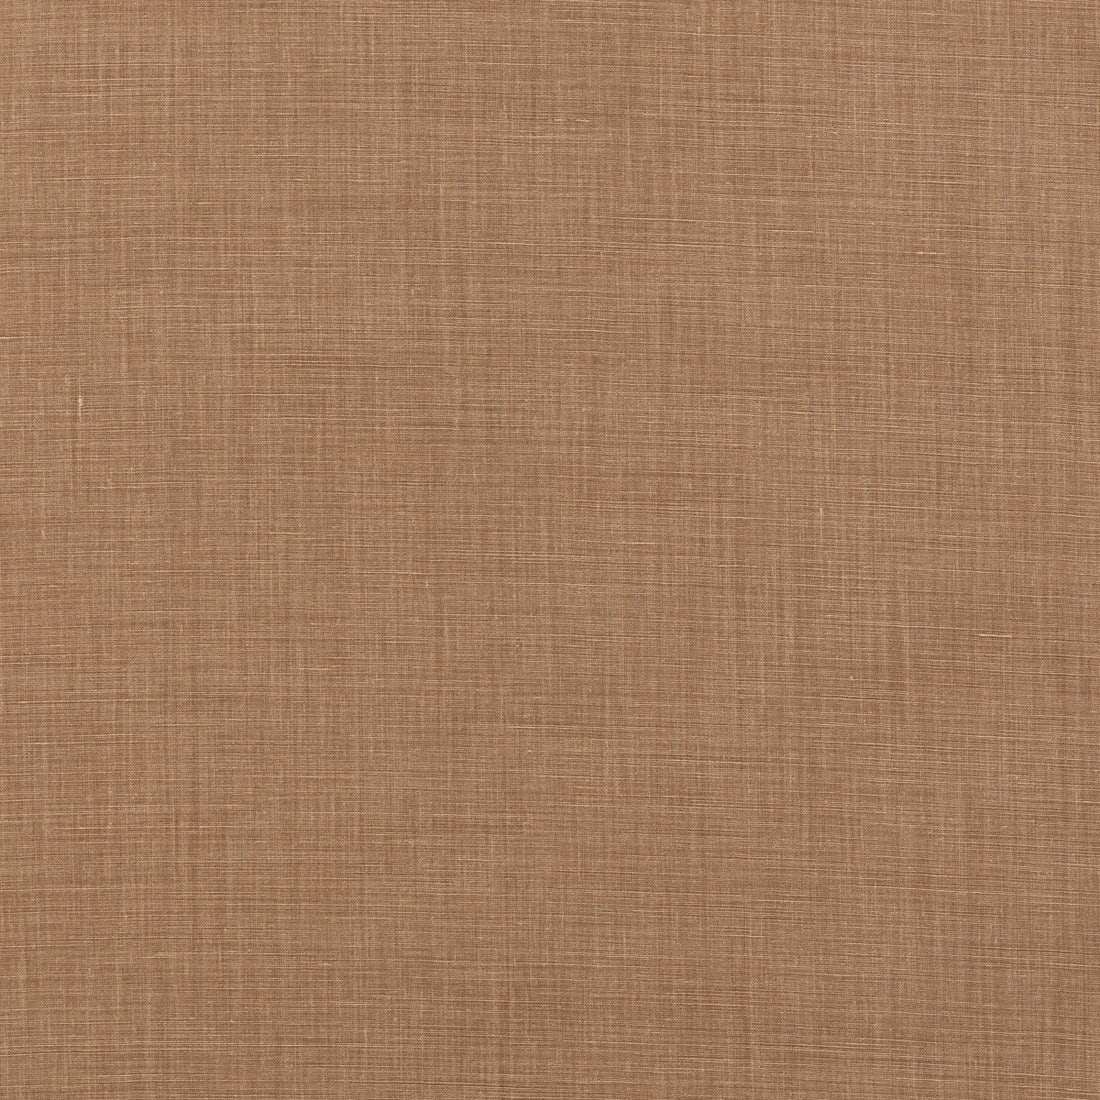 Baker House Linen fabric in chestnut color - pattern BF10961.350.0 - by G P &amp; J Baker in the Baker House Linens collection